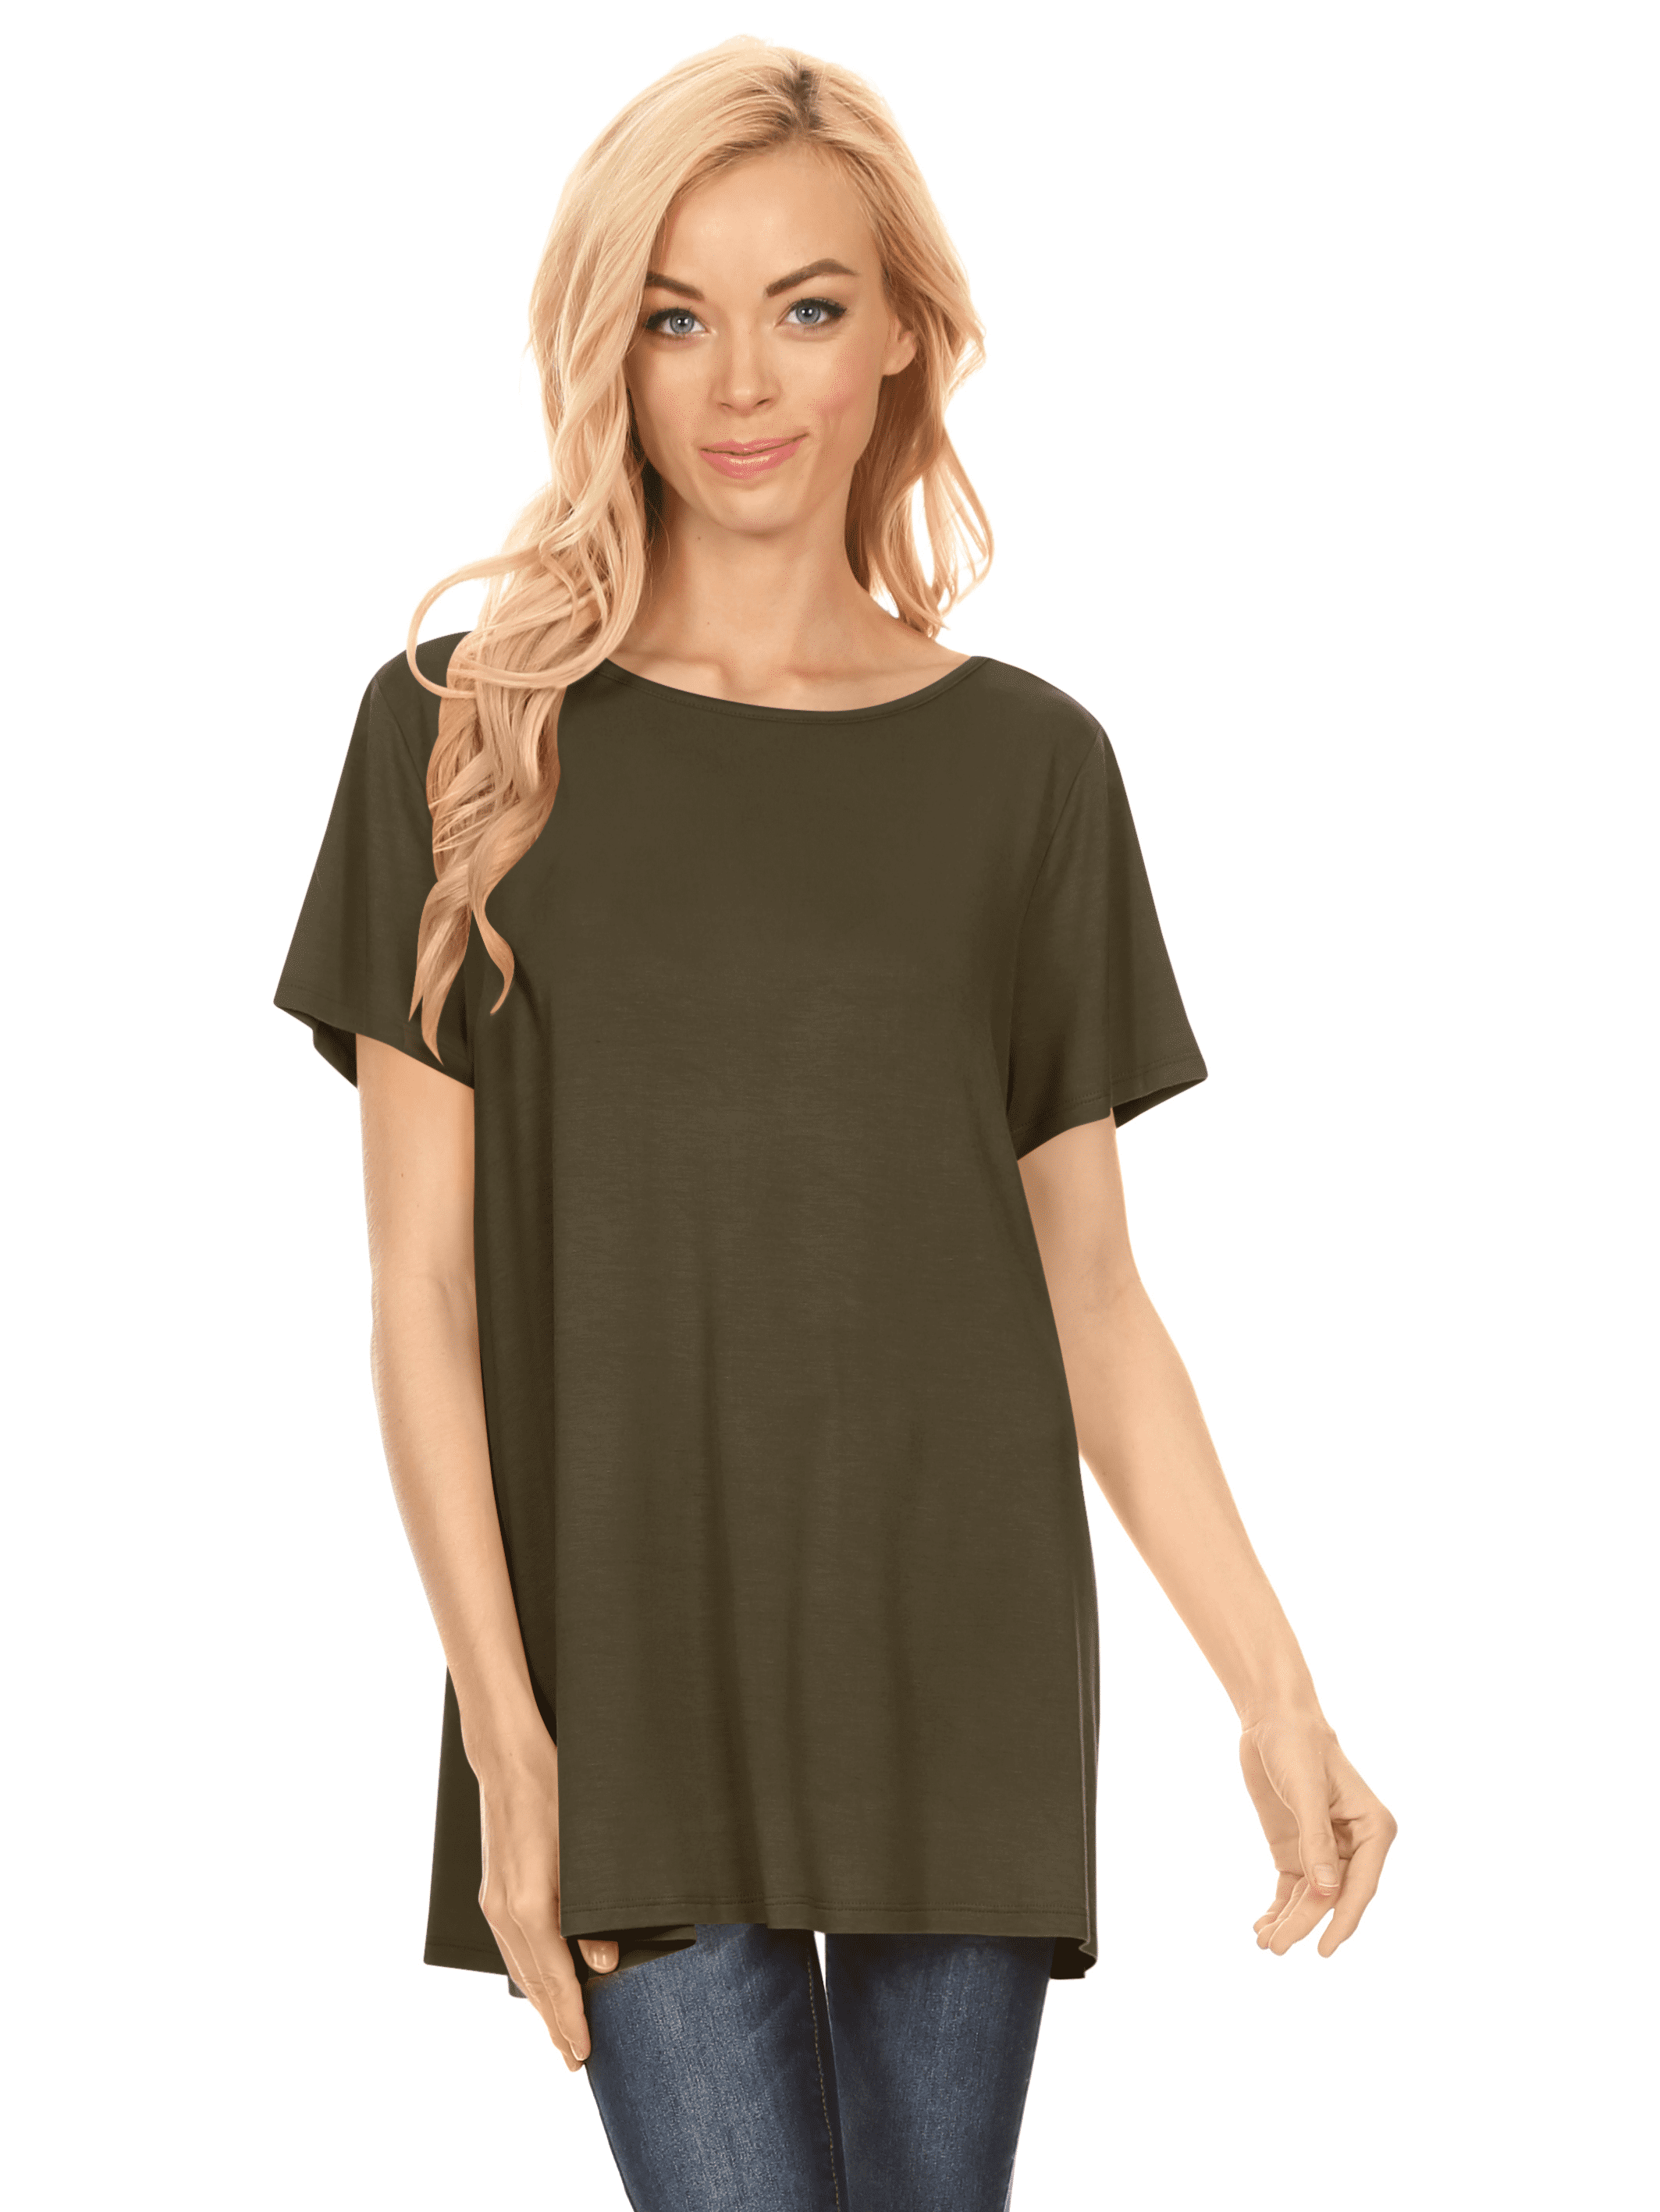 Simlu - olive green short sleeve tunic tops for womens reg and plus ...